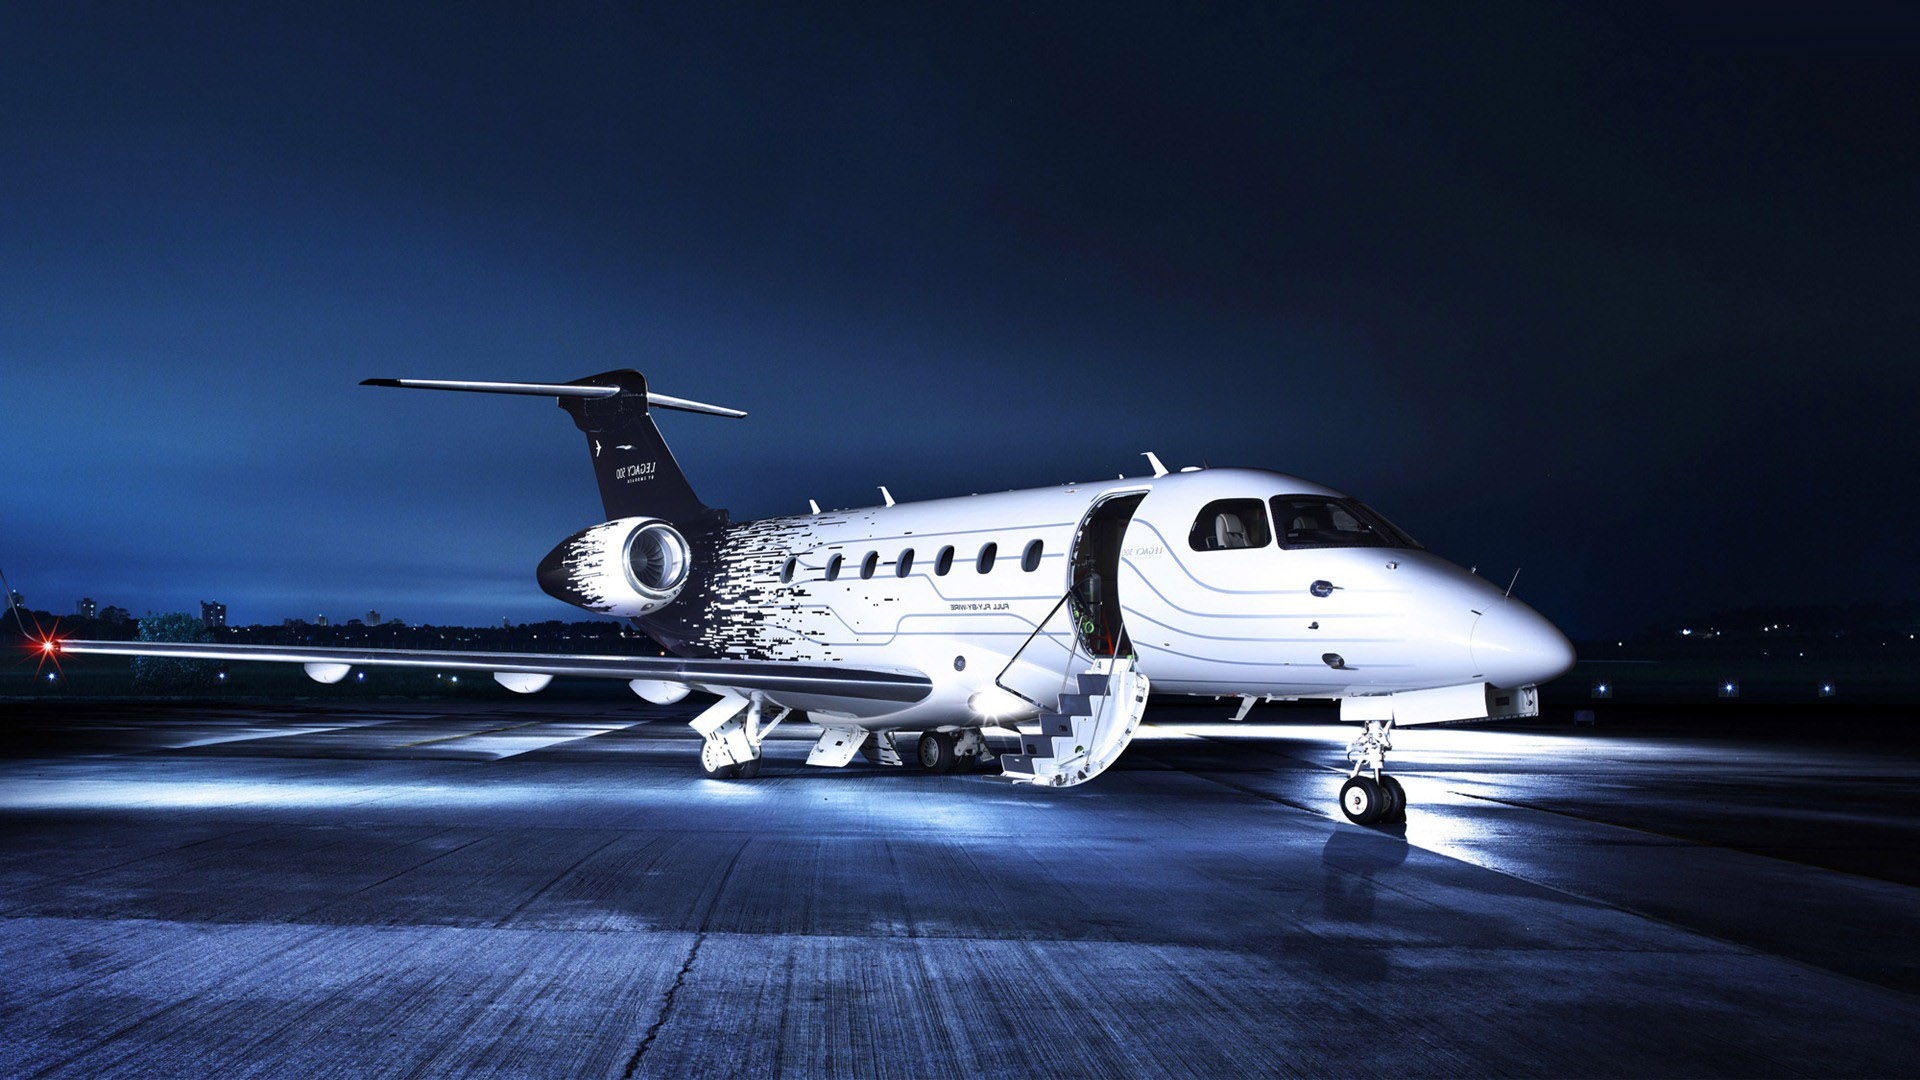 Private Jet Wallpaper On